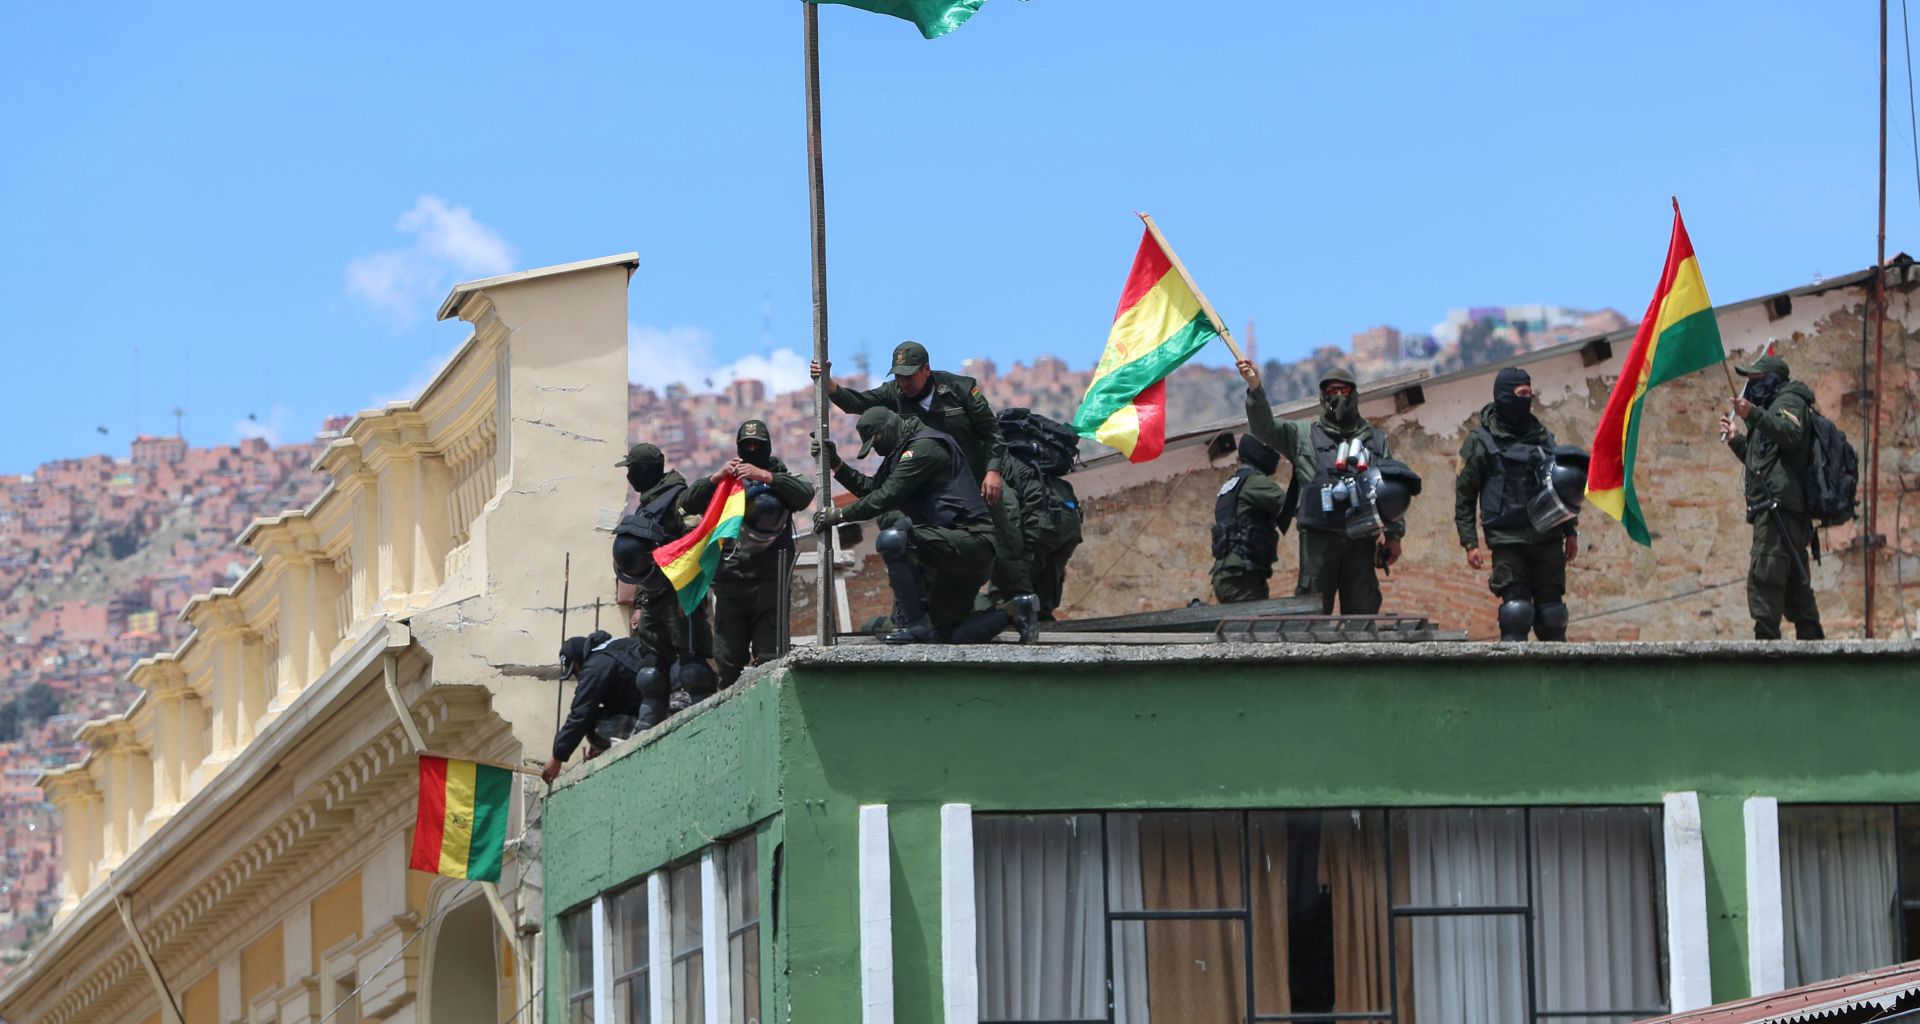 epa07984039 Policemen demonstrate with Bolivian flags after retreating to a unit near Murillo Square, where the headquarters of the Bolivian Government and Legislative are located, one day after the uniformed in several regions mutinied, in La Paz, Bolivia, 09 November 2019.  EPA/MARTIN ALIPAZ